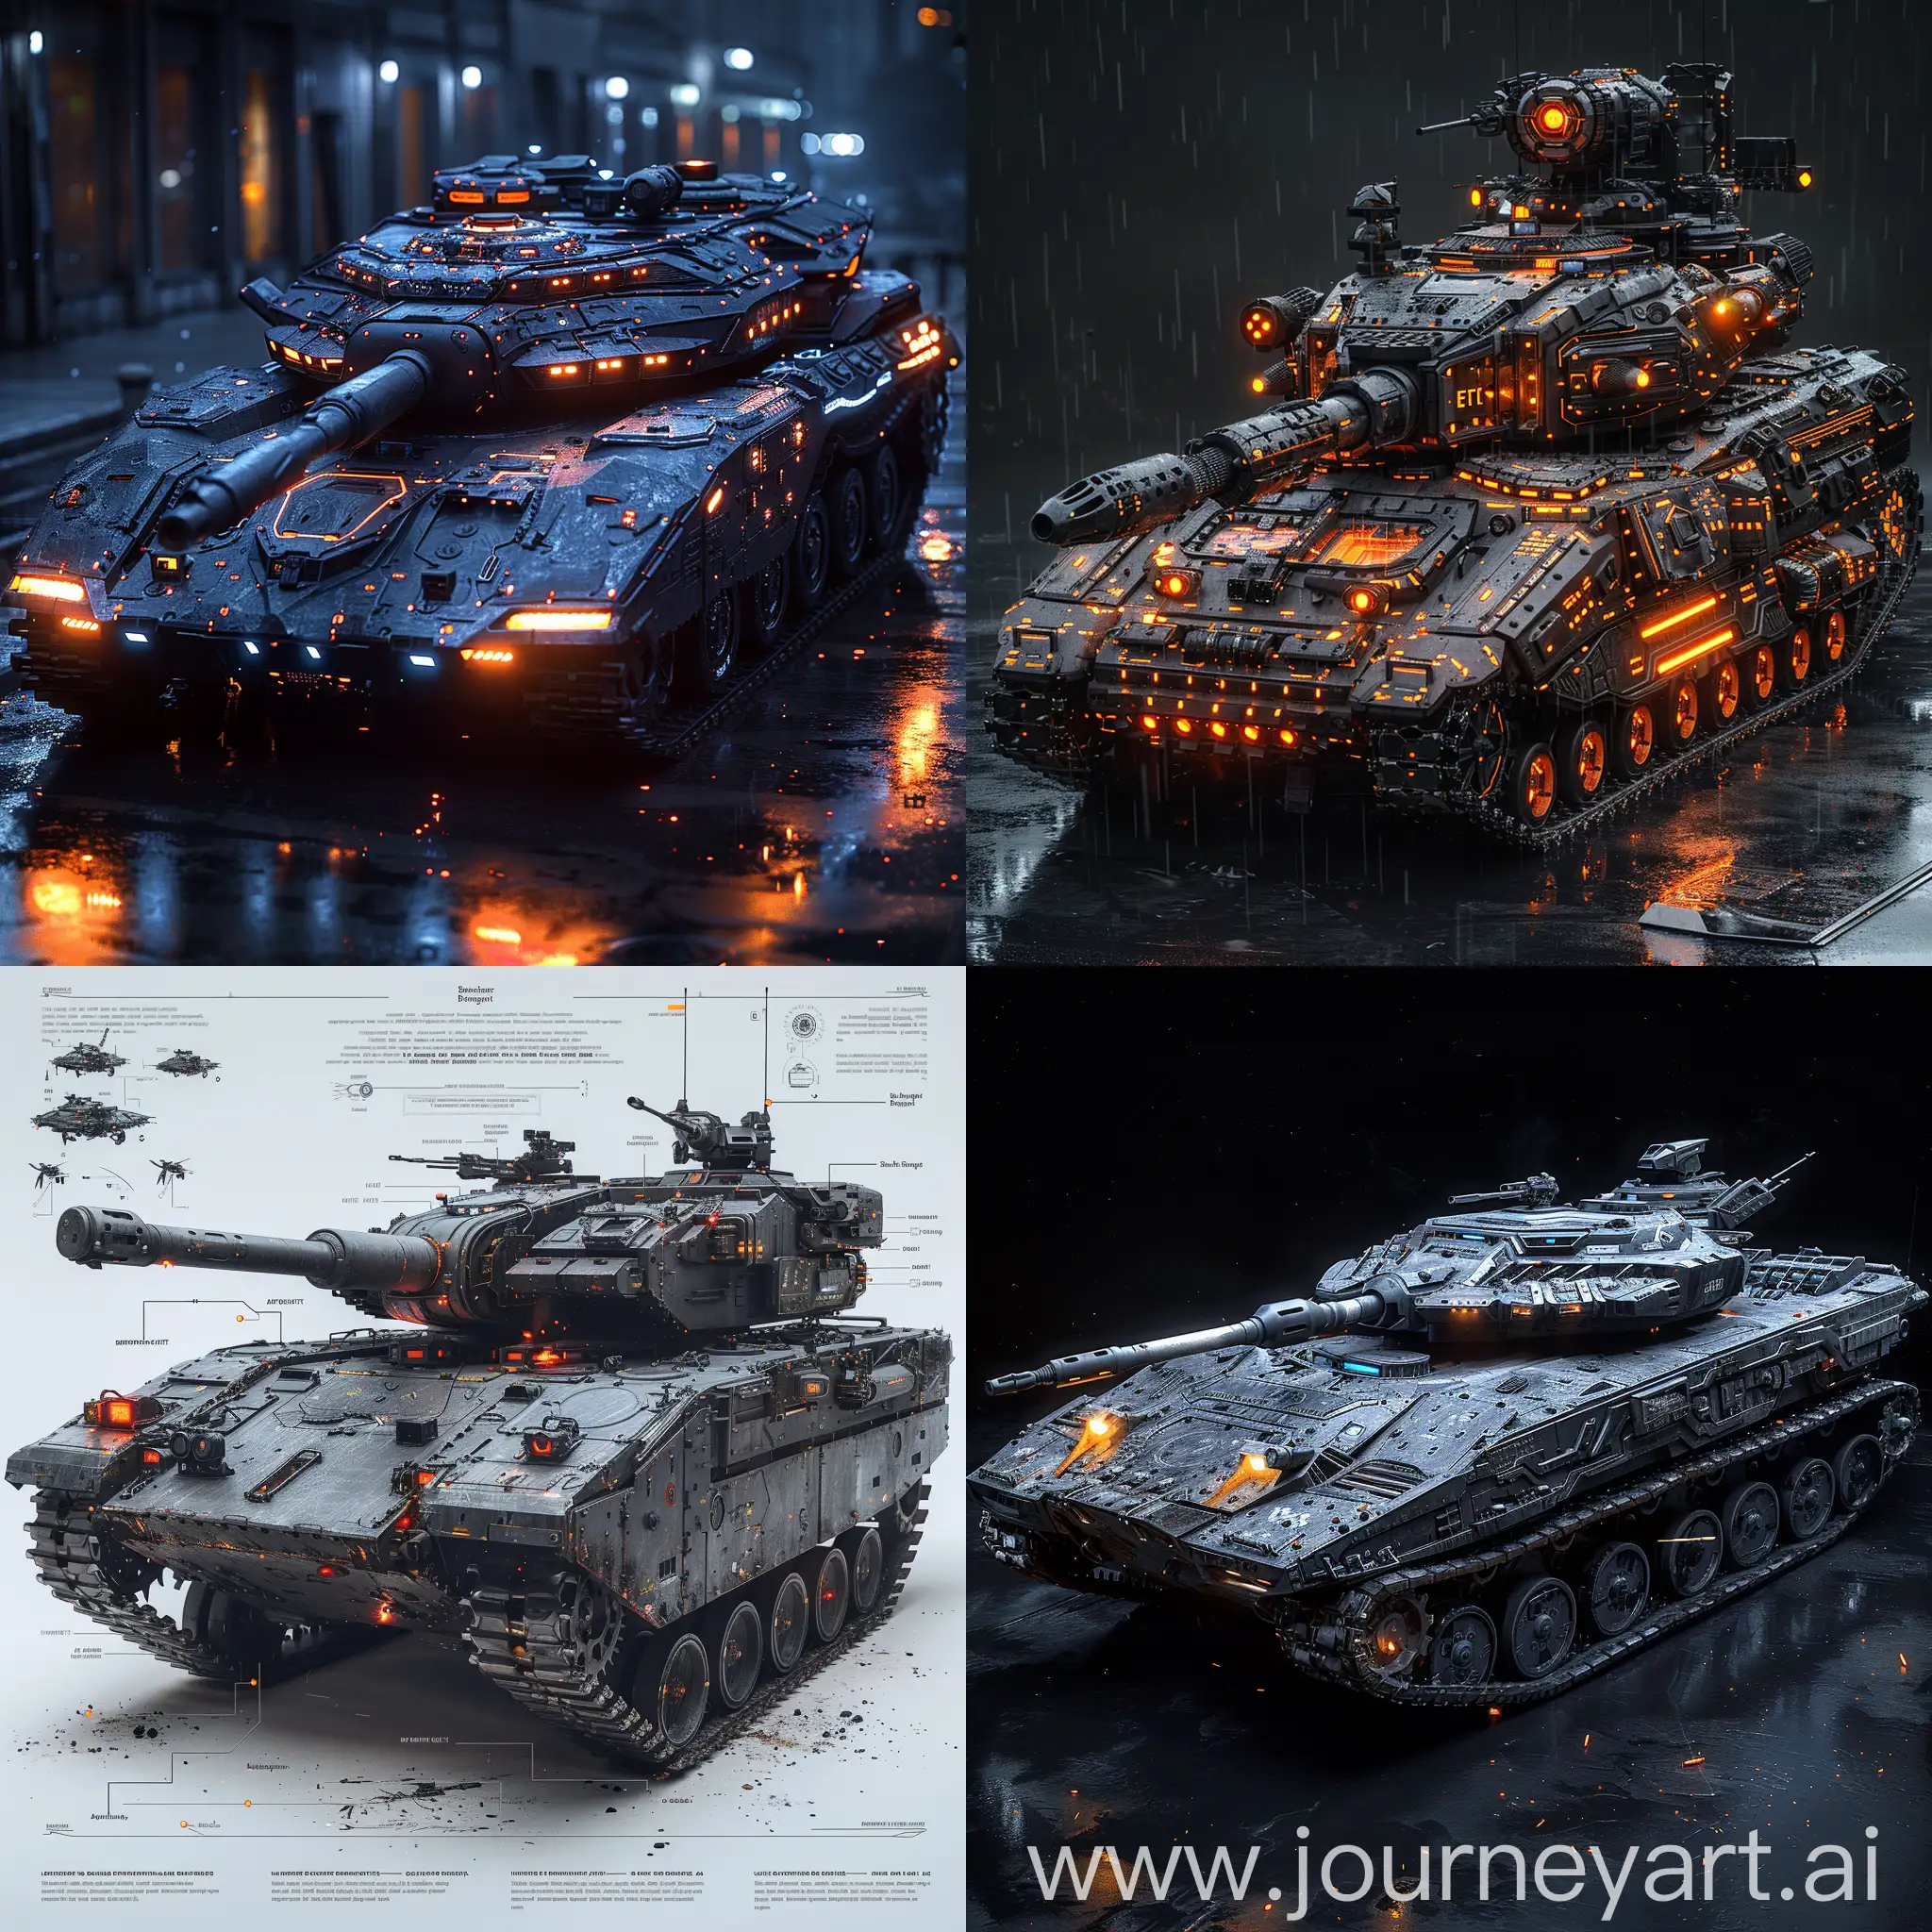 Futuristic-HighTech-Tank-with-Nano-Armor-Coating-and-AIBased-Threat-Detection